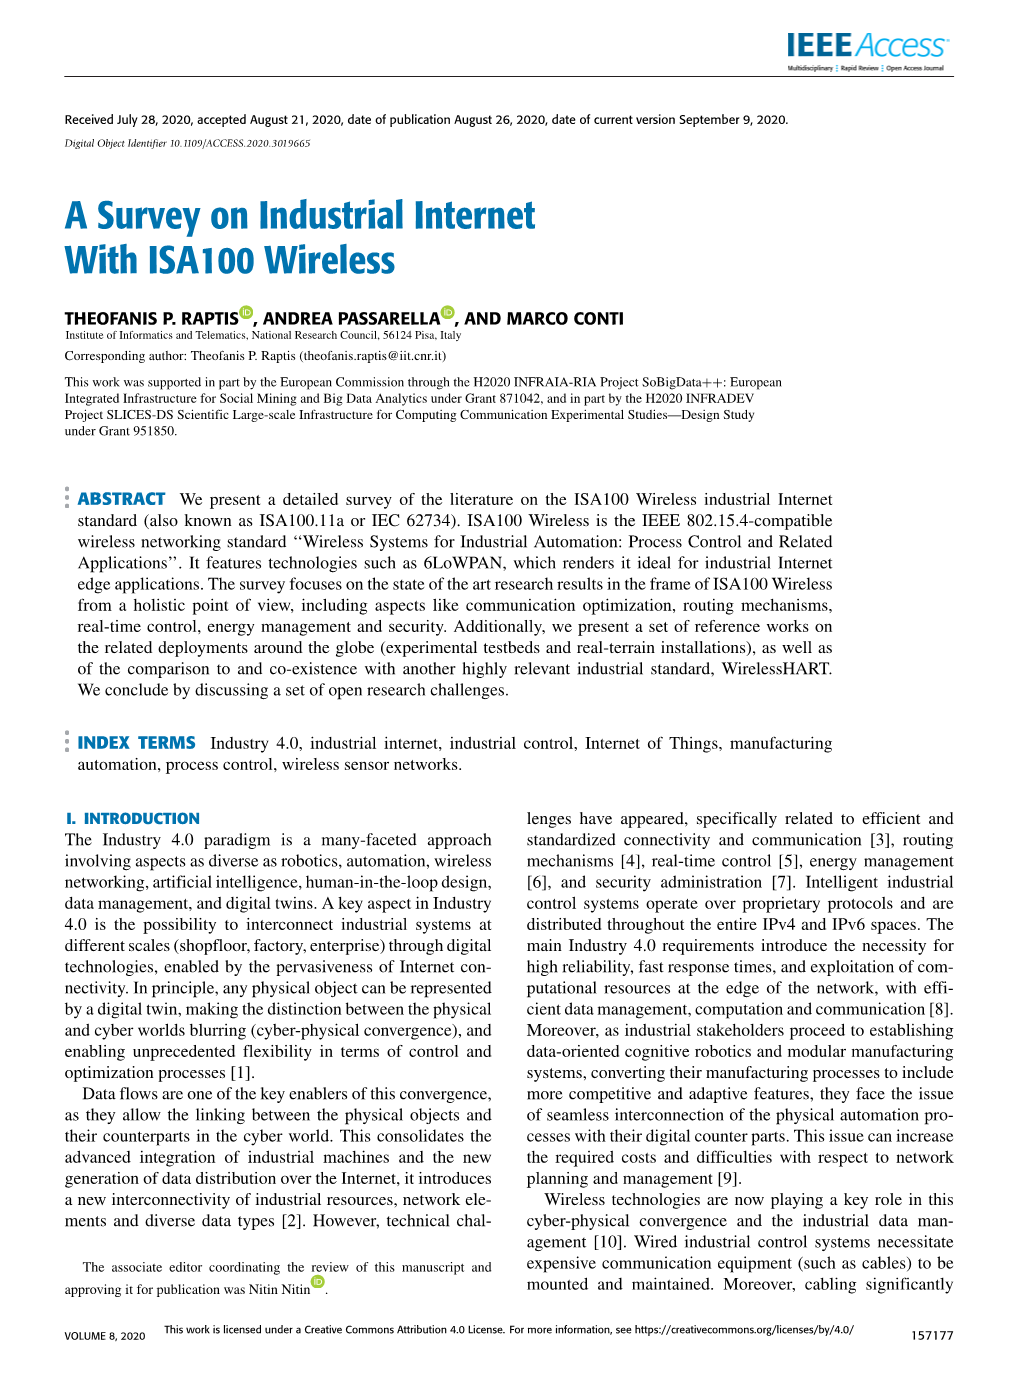 A Survey on Industrial Internet with ISA100 Wireless